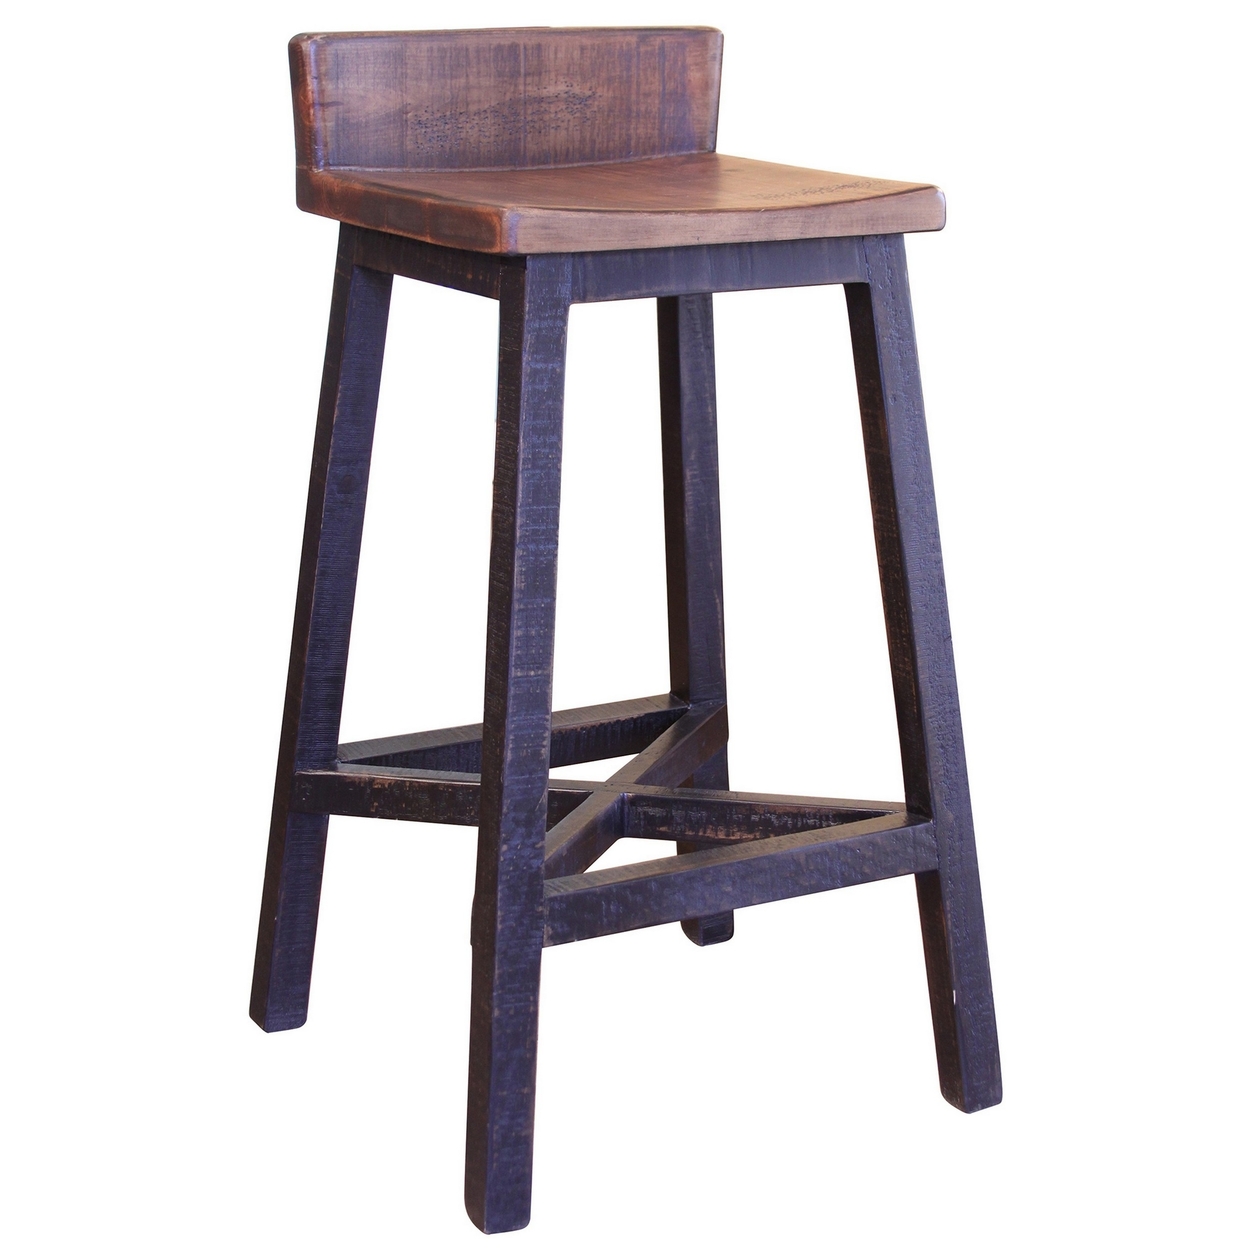 Ata 30 Inch Wood Barstool, Lacquer Finished, Low Backrest, Brown, Black- Saltoro Sherpi